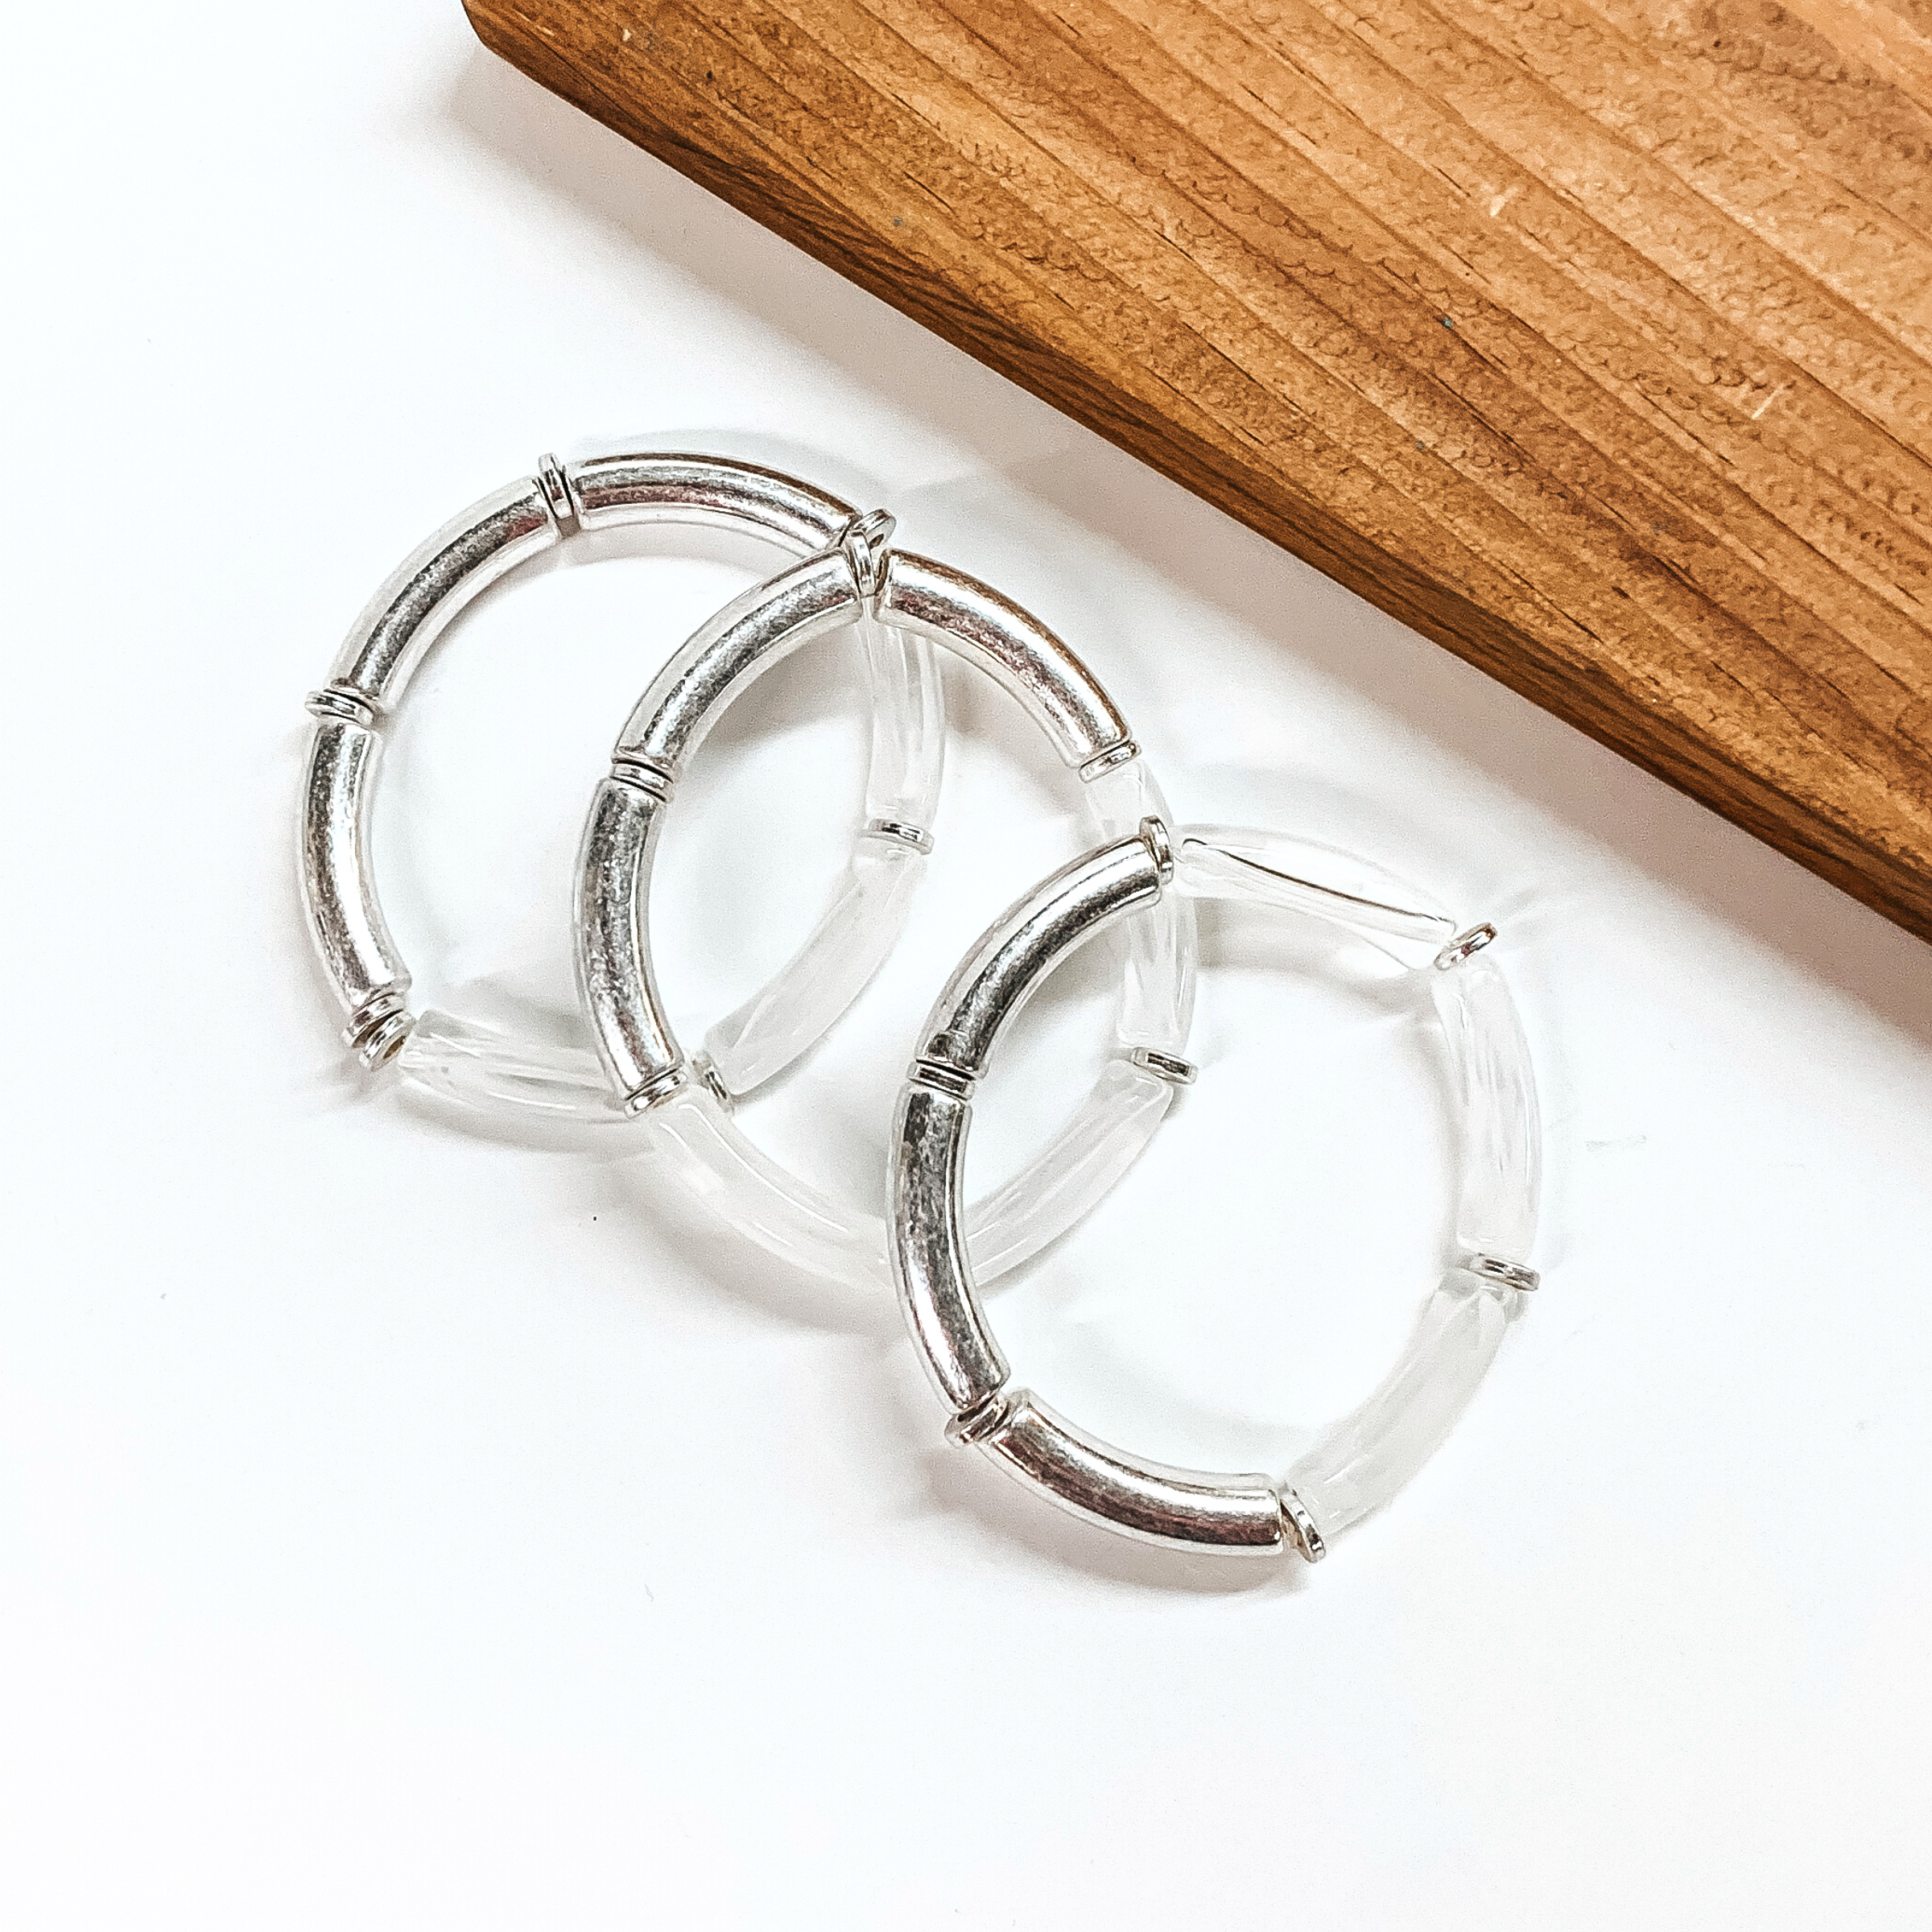 This is a set of three tube bracelets in metallic silver and clear, with silver spacers. These bracelets are taken on a white background with a slab of wood in the back as decor.